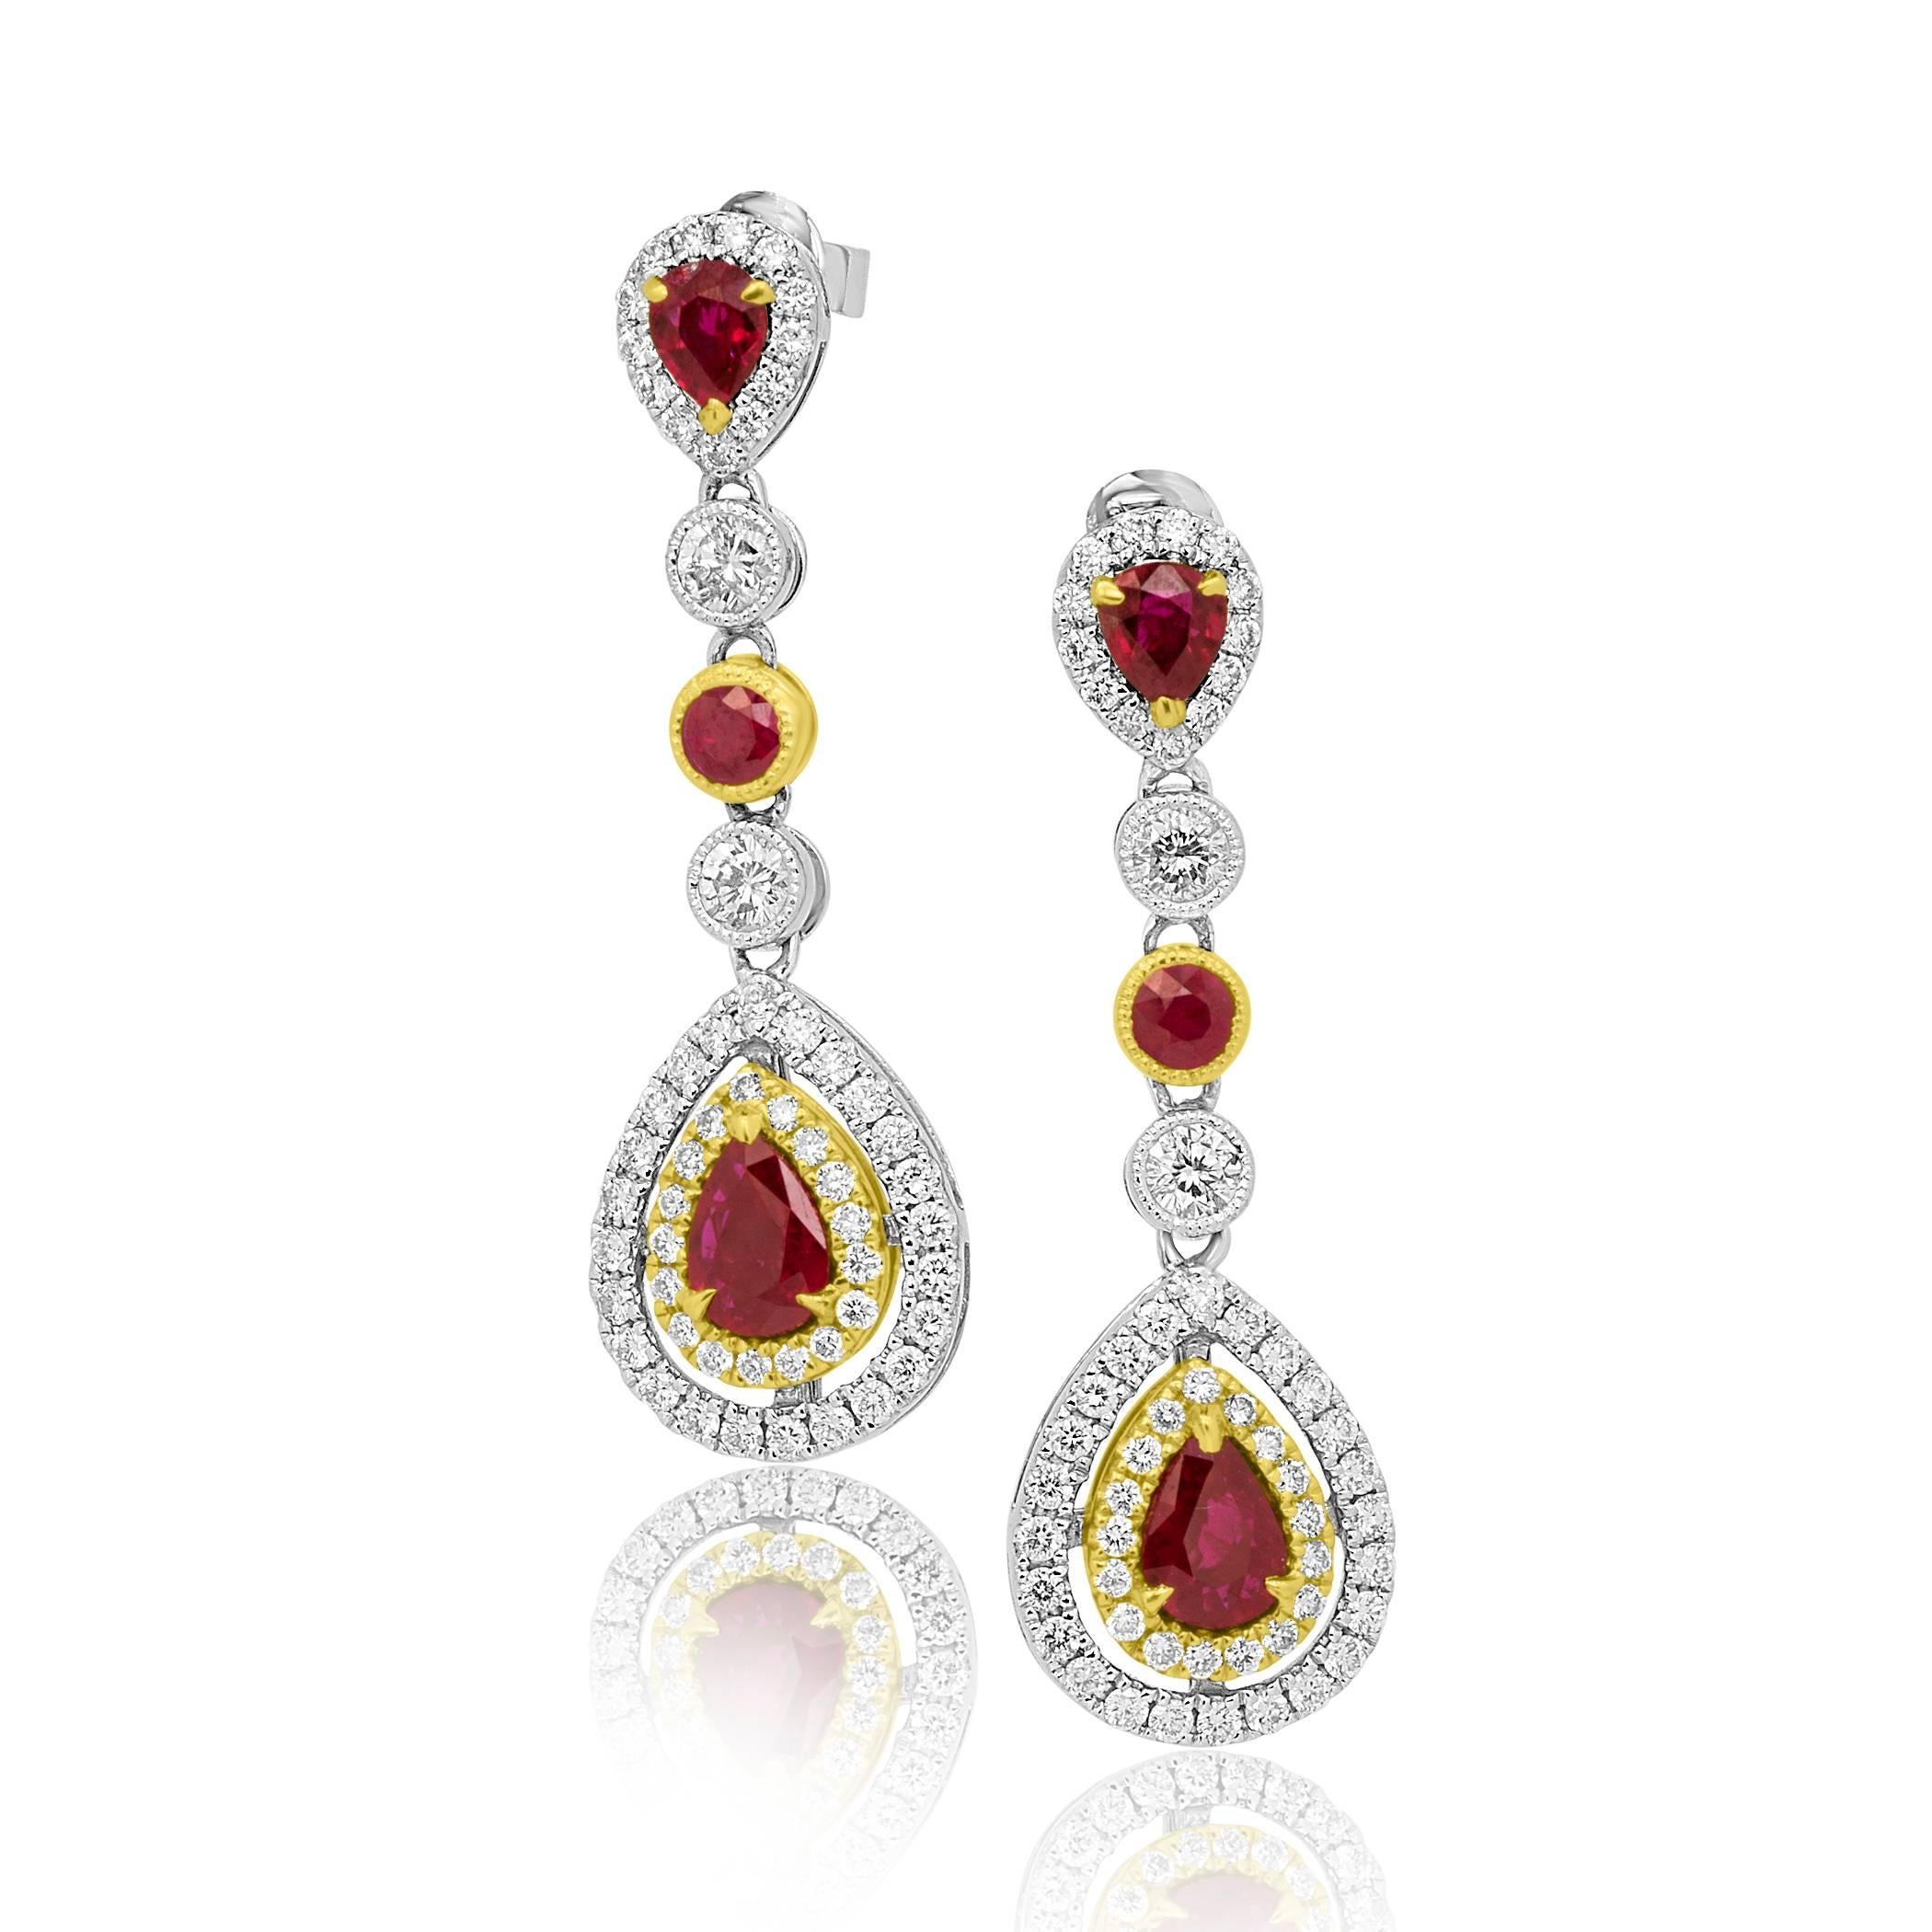 2 Pear shape Ruby 1.85 Carat encircled in double halo of White Diamonds 1.90 carat with 2 Ruby Rounds 0.44 Carat in Bezel setting and 2 Ruby Pear shape 0.76 Carat encircled in single halo of white diamonds. 

Diamonds total weight 1.90 Carat